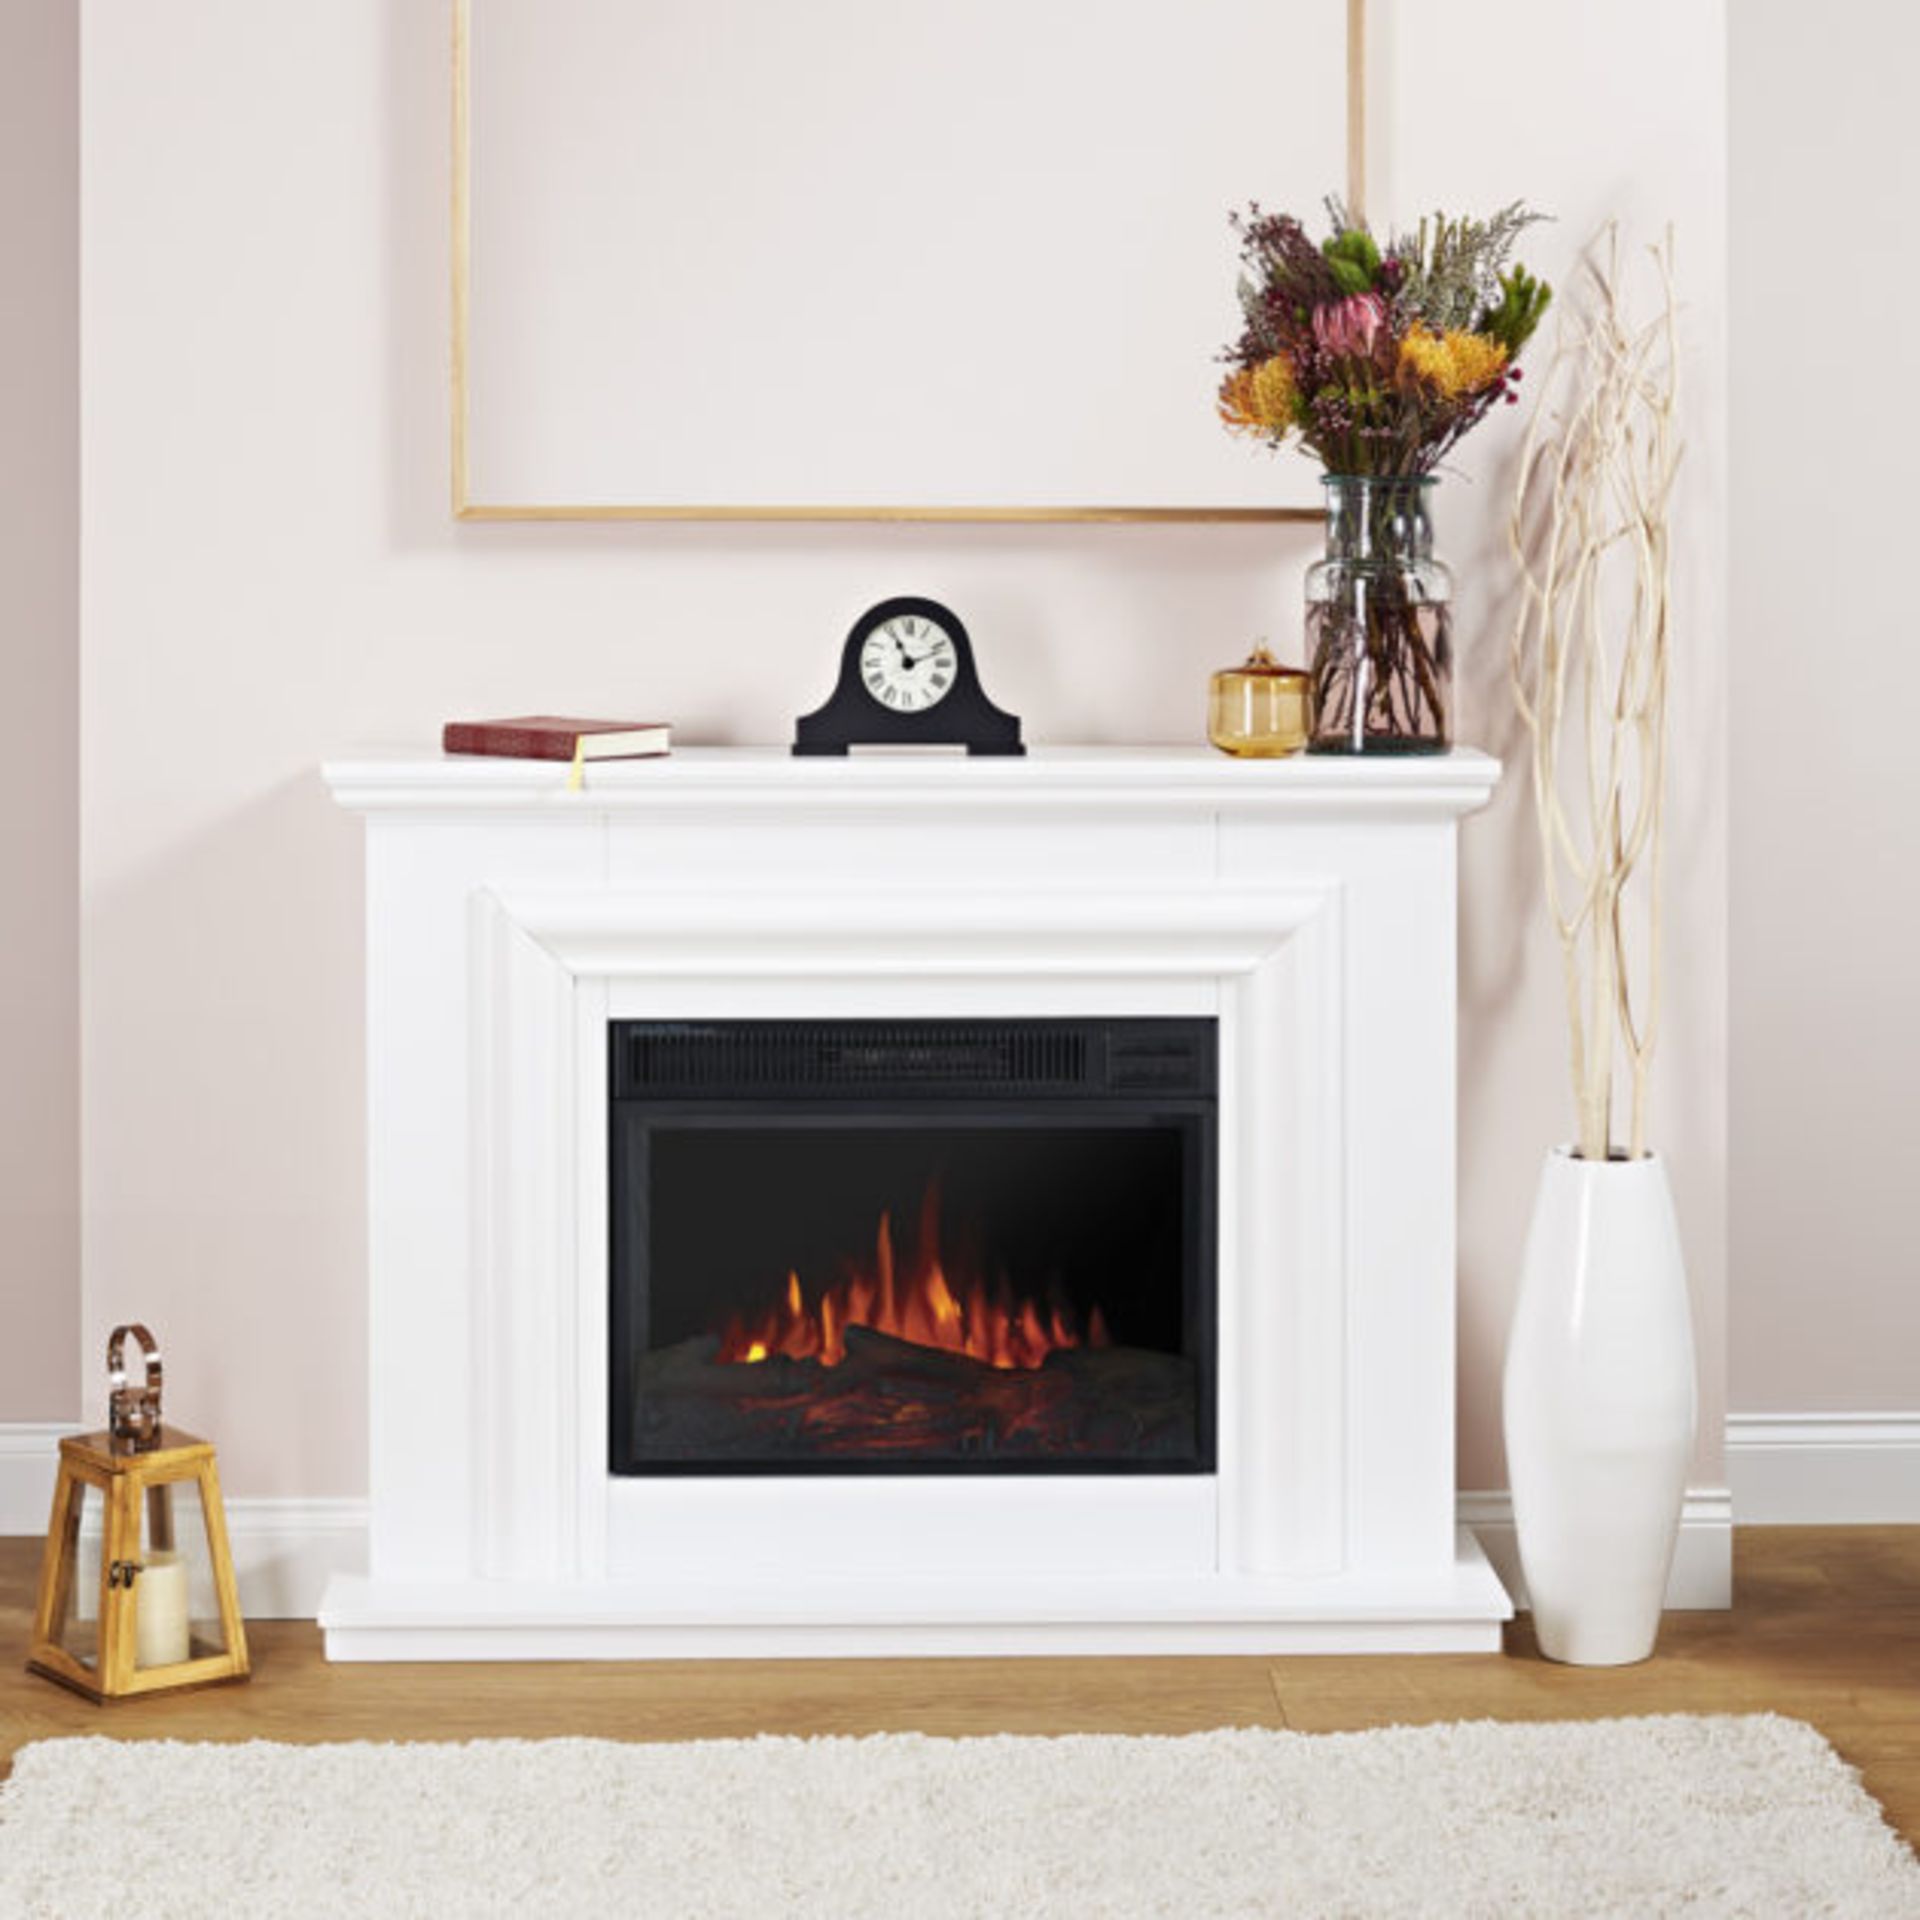 (OS144) Amersham White Electric fire suite. RRP £325.00. This electric fire features a realistic